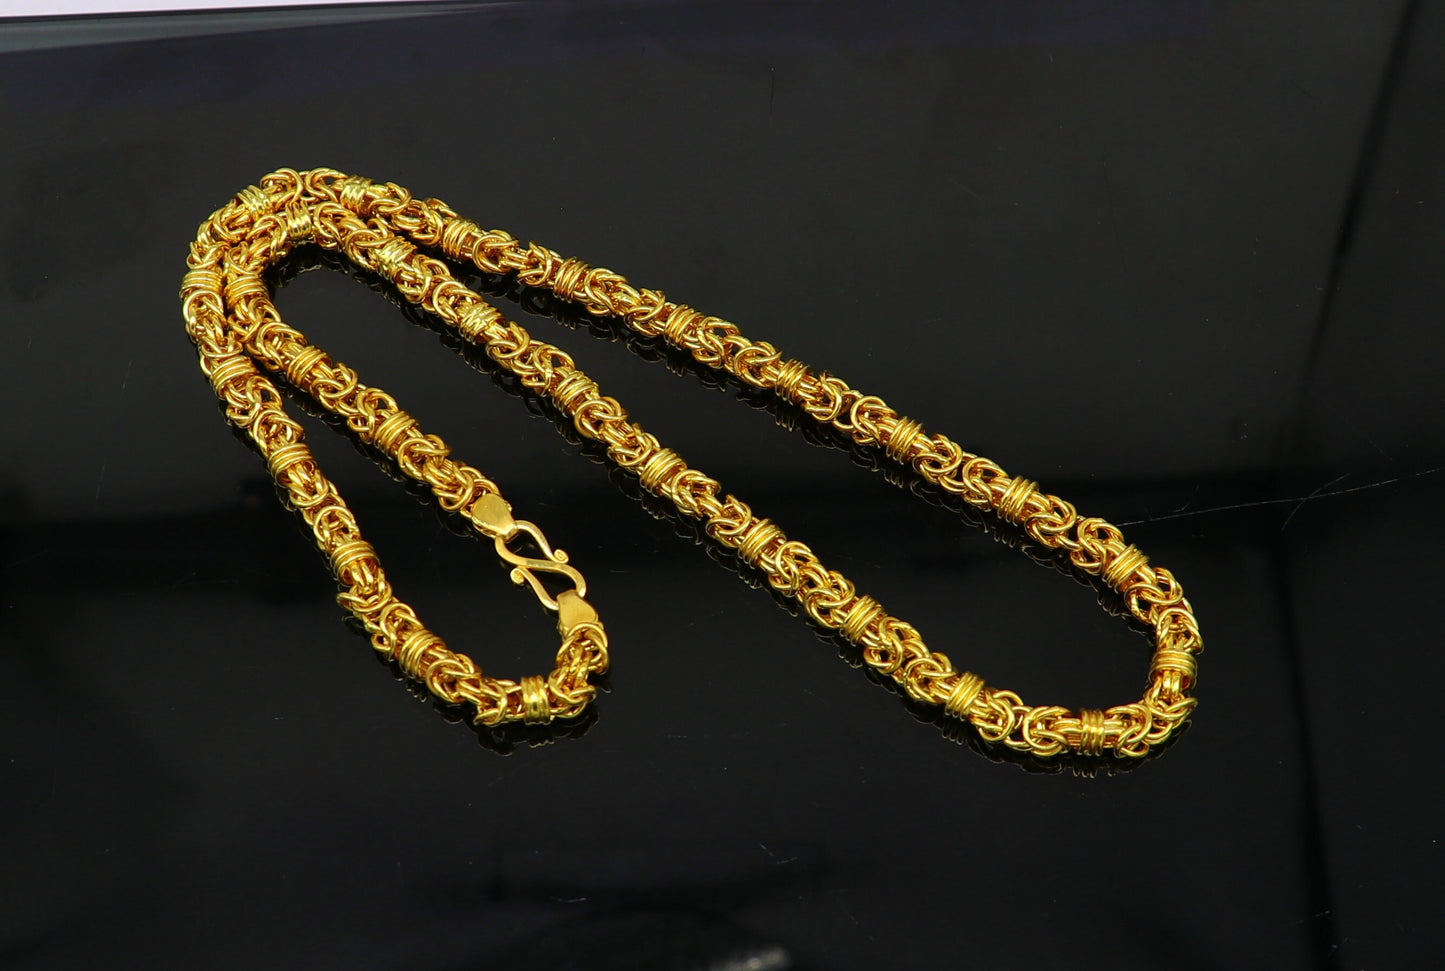 22kt yellow gold handmade exclusive byzantine chain, amazing fancy stylish best gifting chain necklace, customized elegant chain ch231 - TRIBAL ORNAMENTS